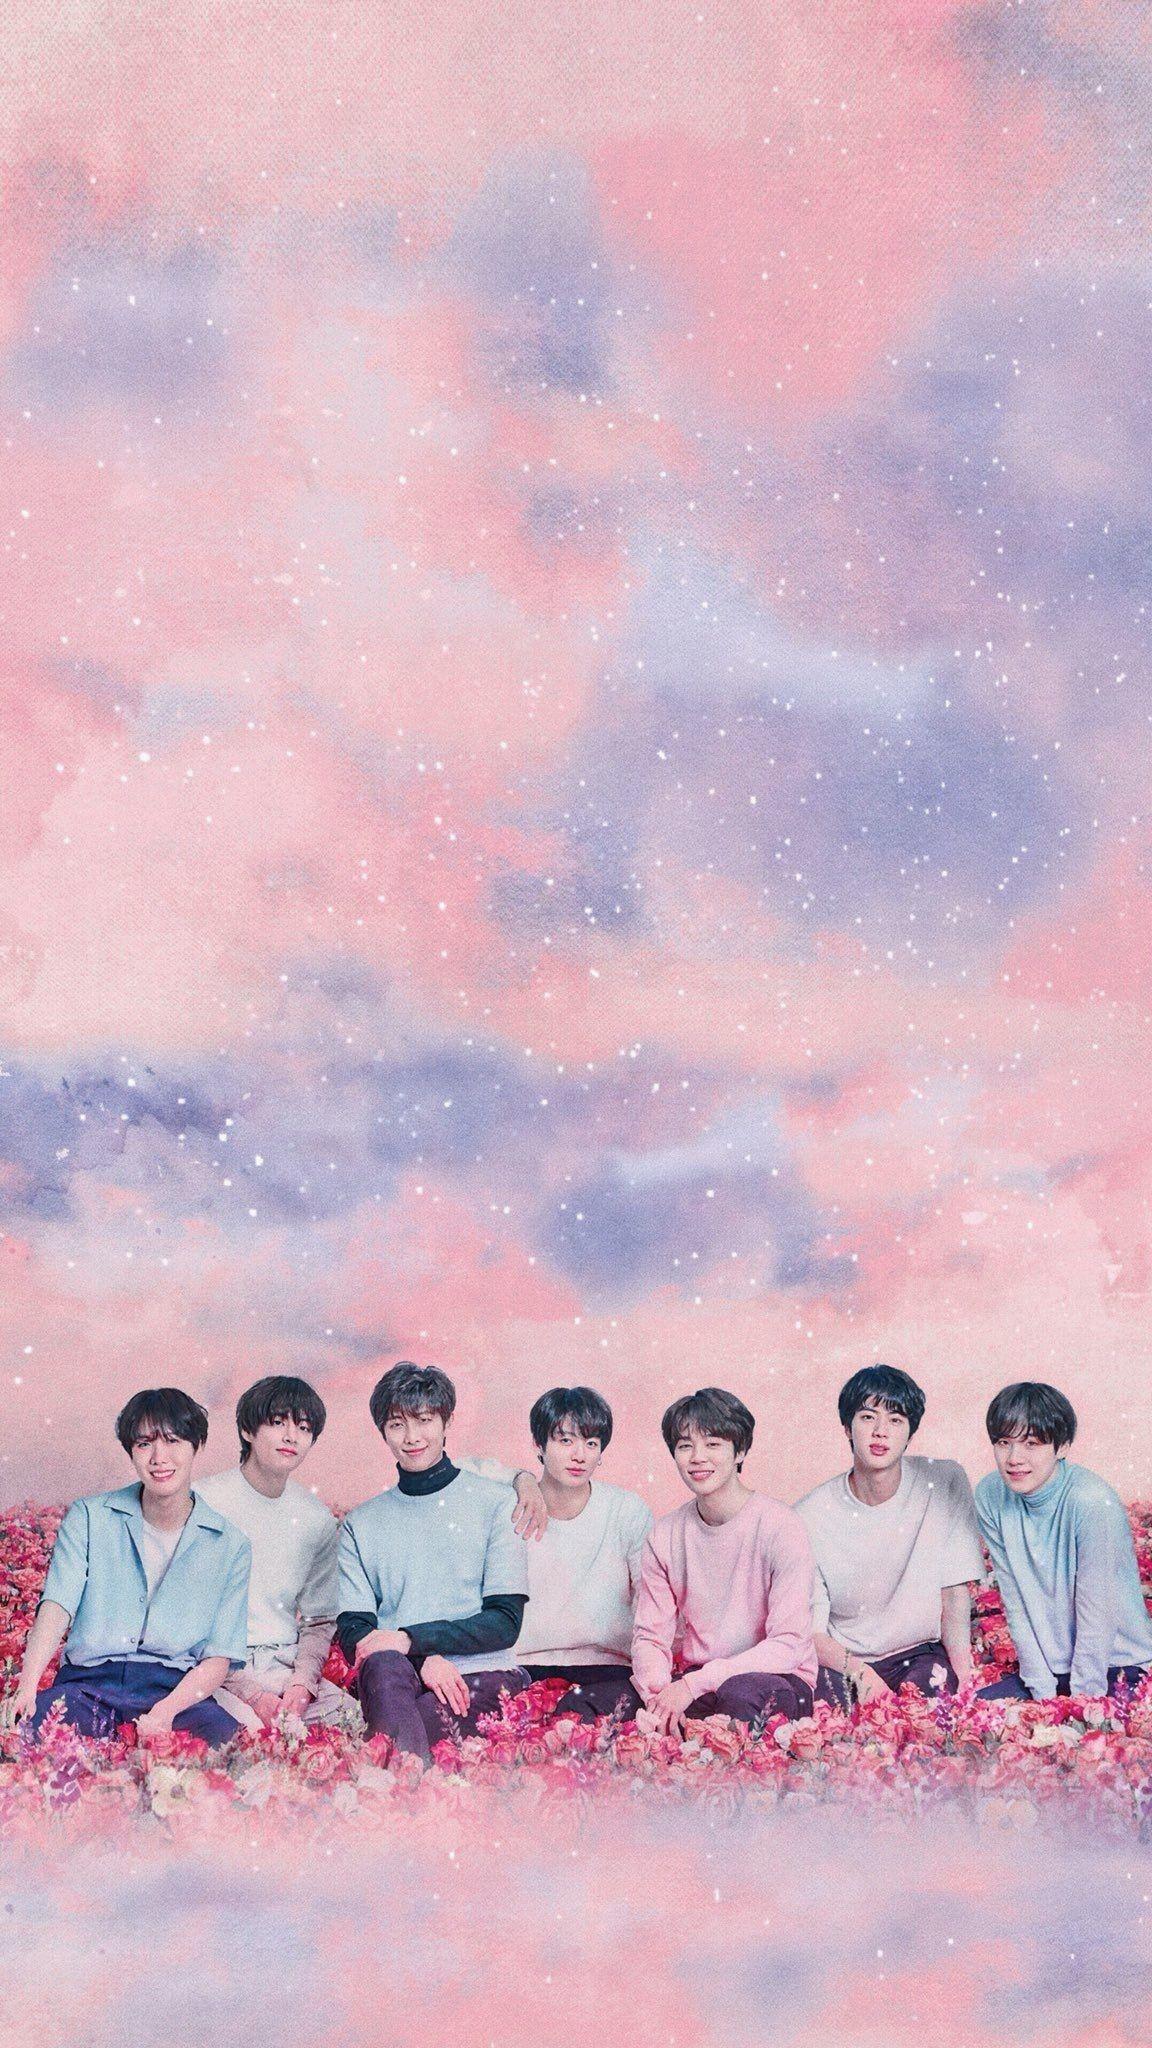 Cute Wallpapers For Bts Army / BTS Army Wallpapers - Wallpaper Cave - We have a massive amount ...